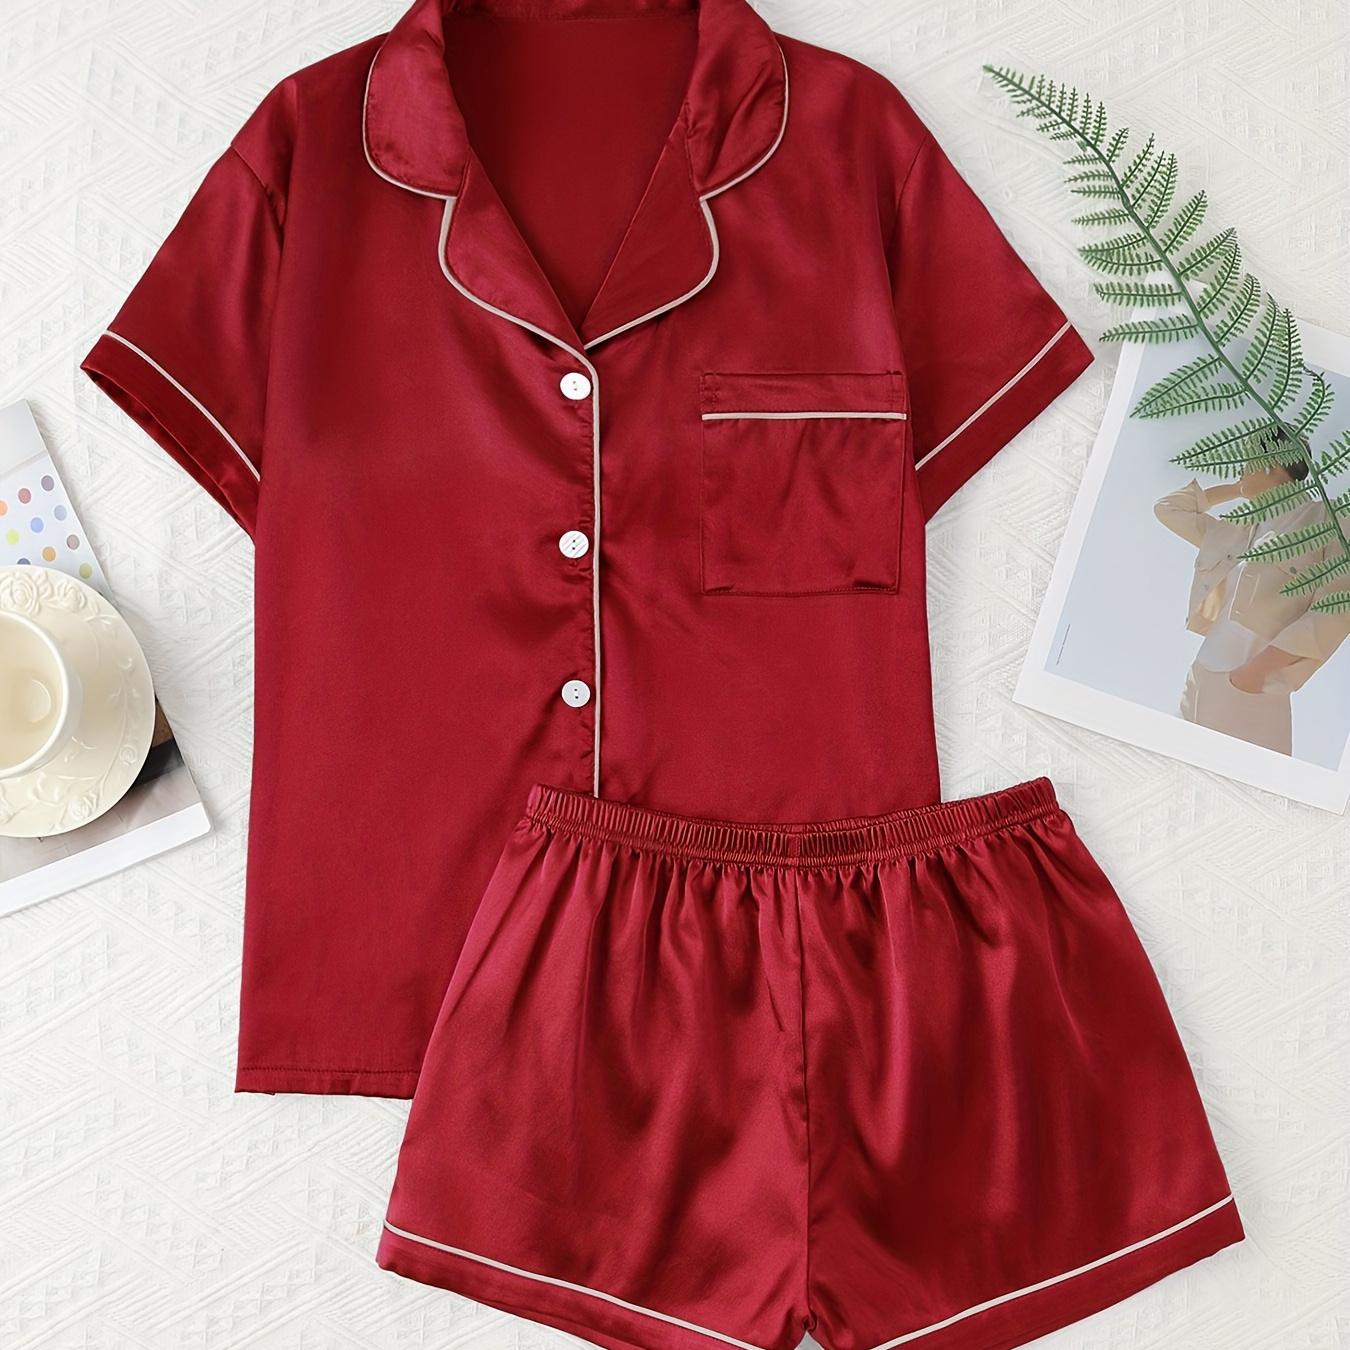 

Women's Solid Satin Casual Pajama Set, Short Sleeve Buttons Lapel Top & Shorts, Comfortable Relaxed Fit